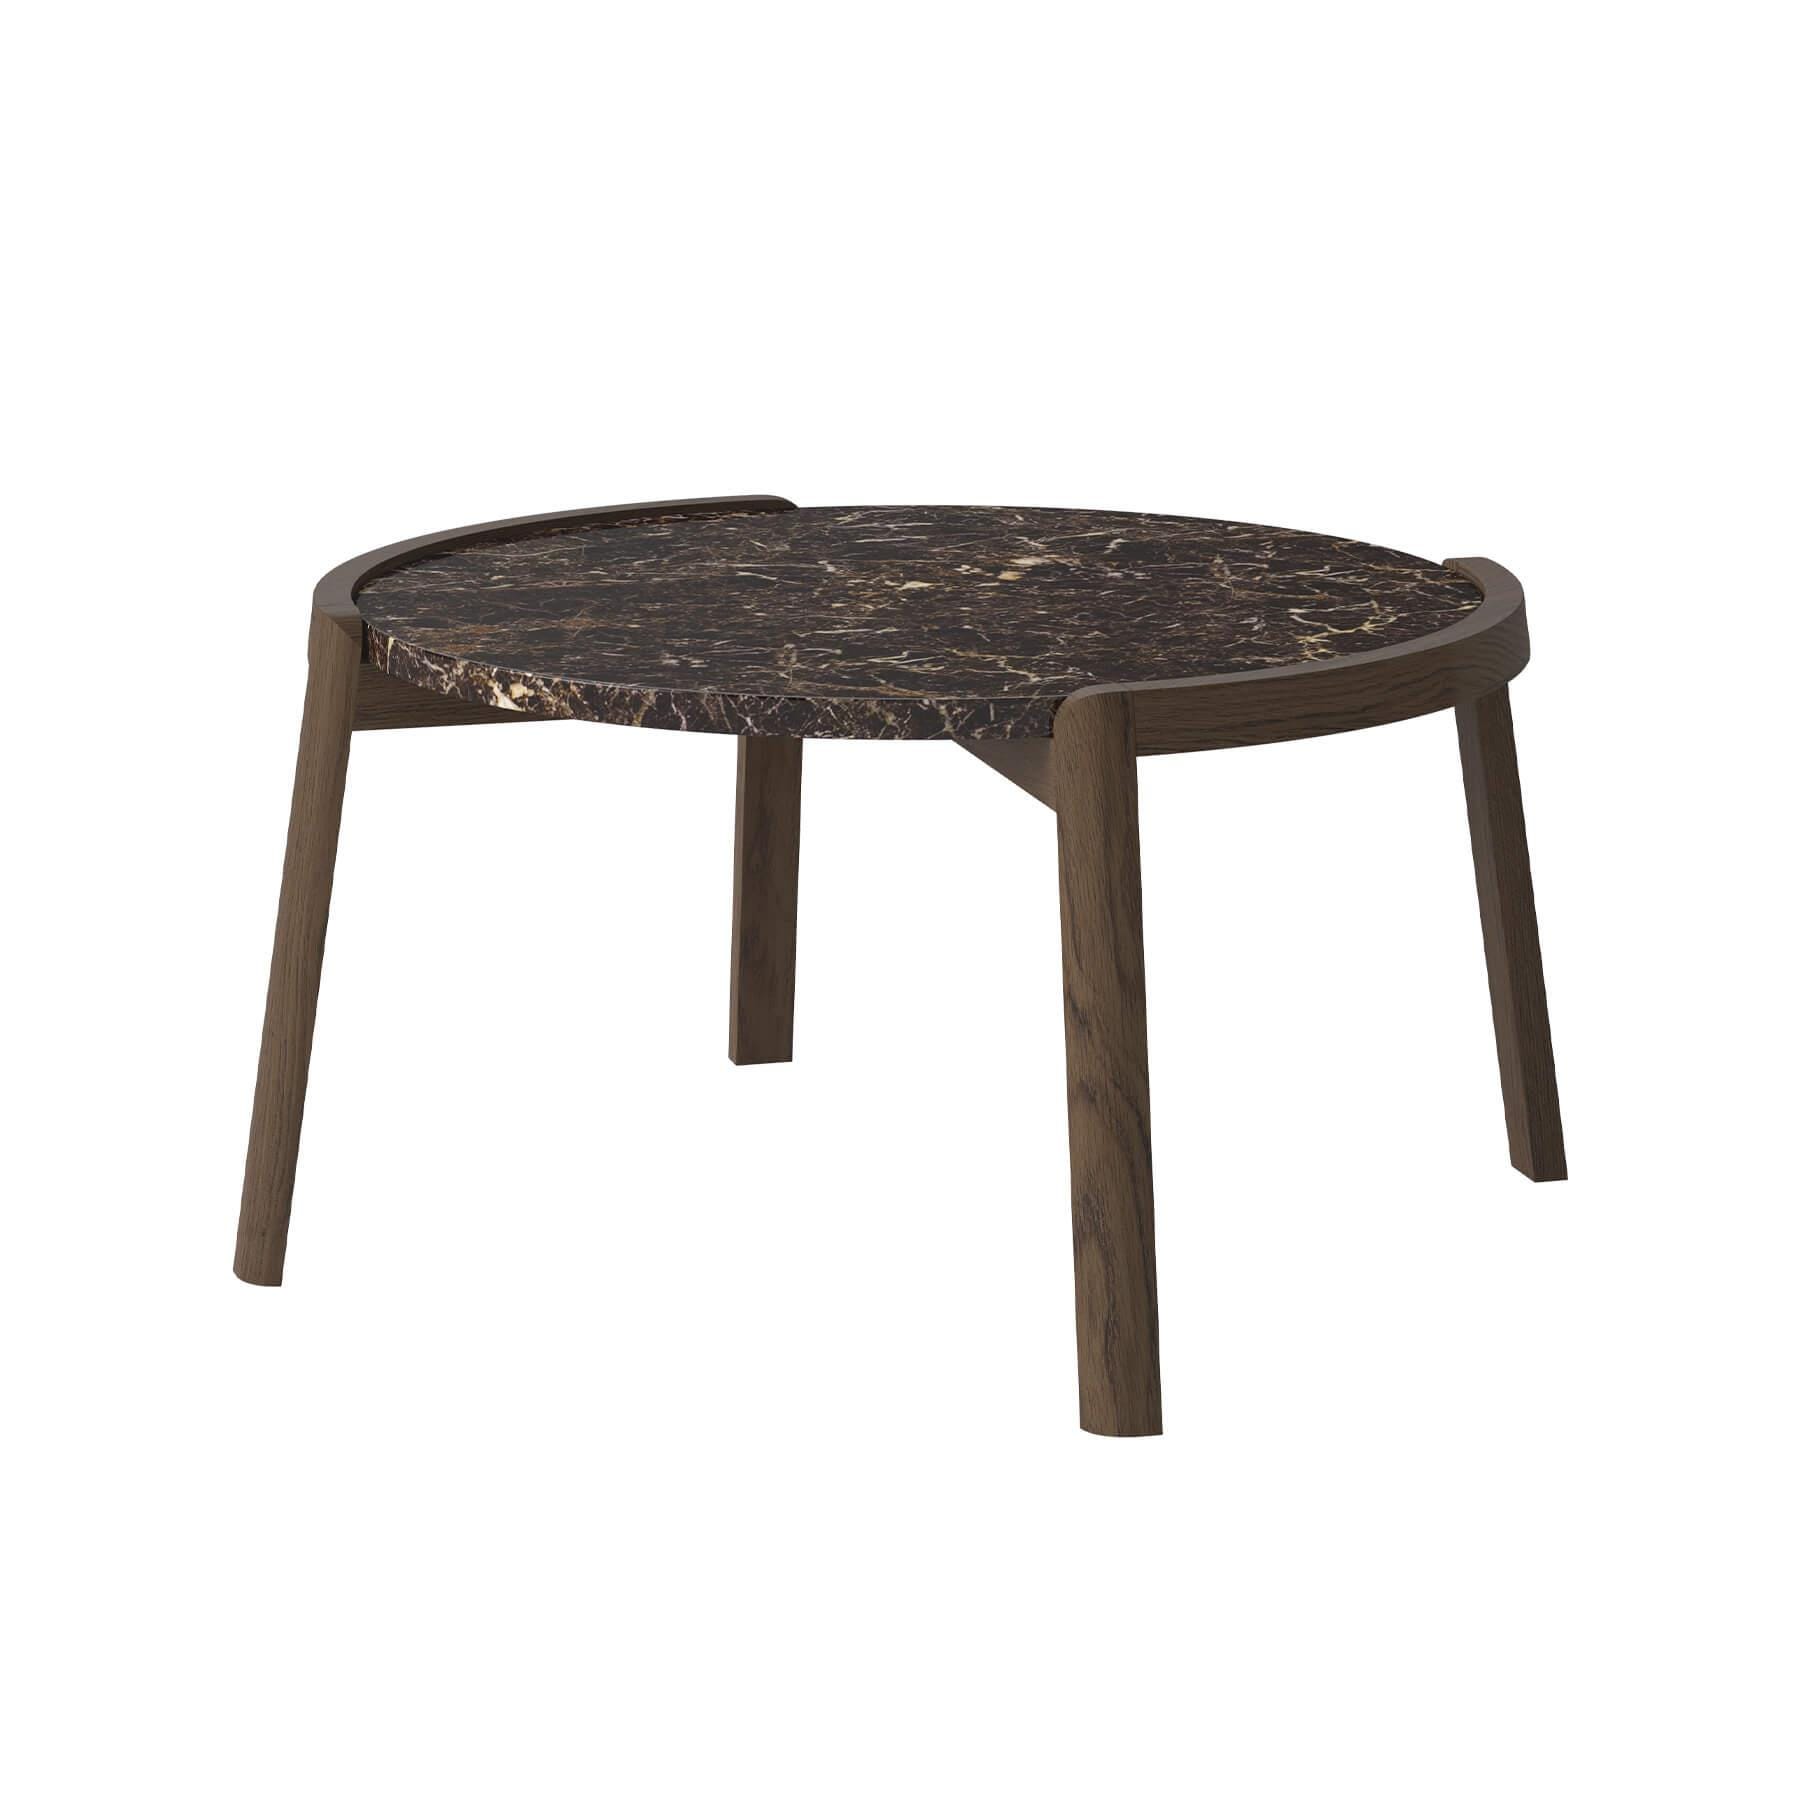 Bolia Mix Coffee Table Medium Dark Oiled Legs Brown Marble Designer Furniture From Holloways Of Ludlow